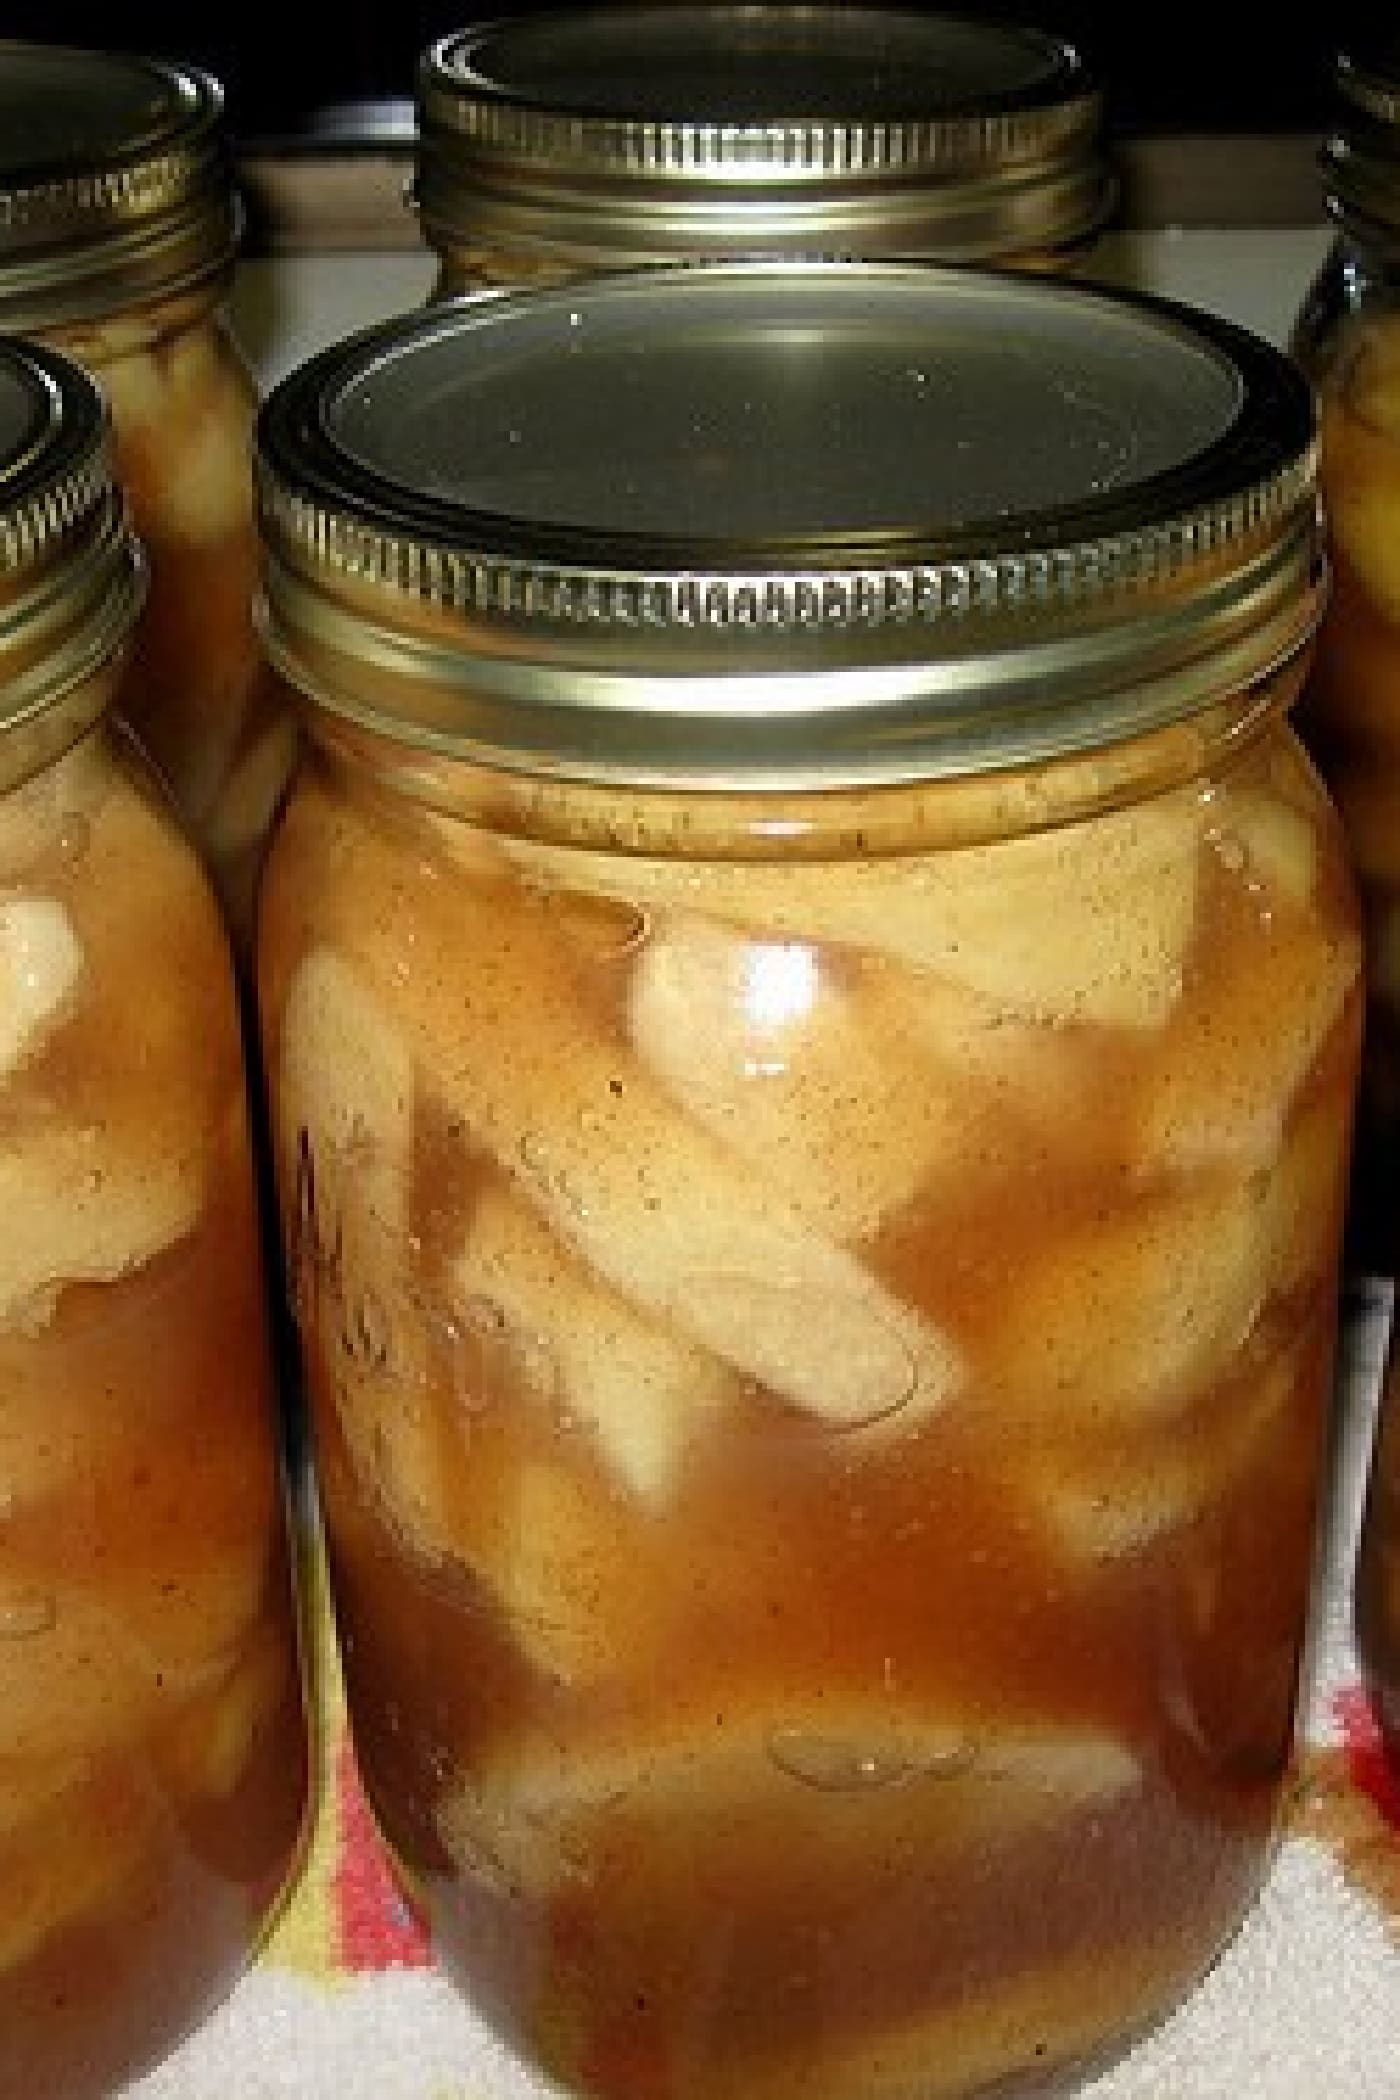 https://reluctantentertainer.com/wp-content/uploads/2021/10/canned-Apple-Pie-in-a-Jar-Recipe.jpeg